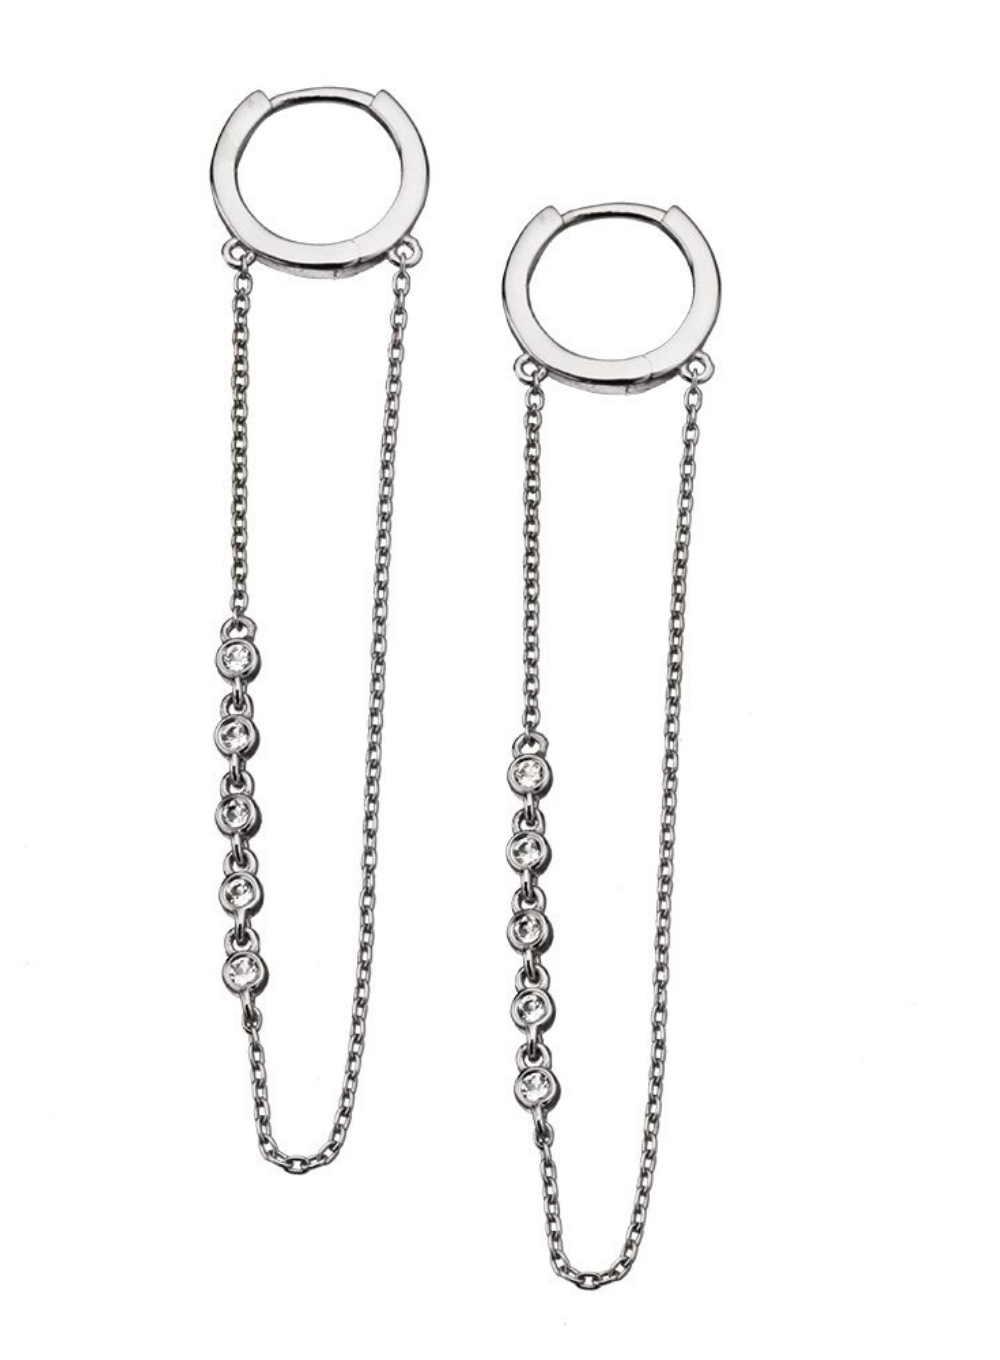 JENNIFER ZEUNER | Mira Earring in Sterling Silver with Chain and Stones